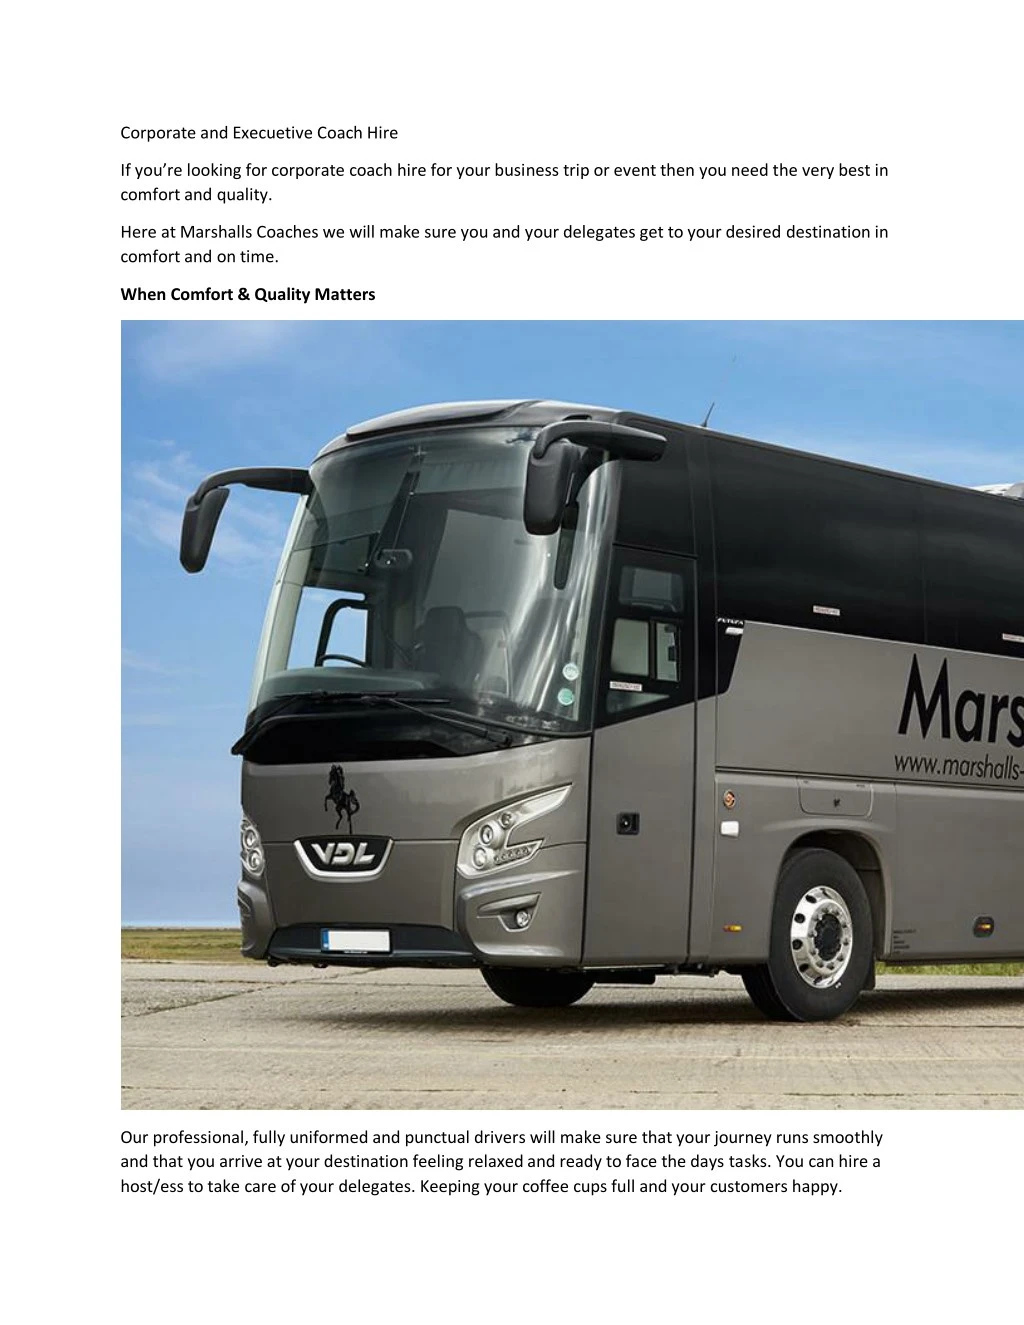 corporate and execuetive coach hire